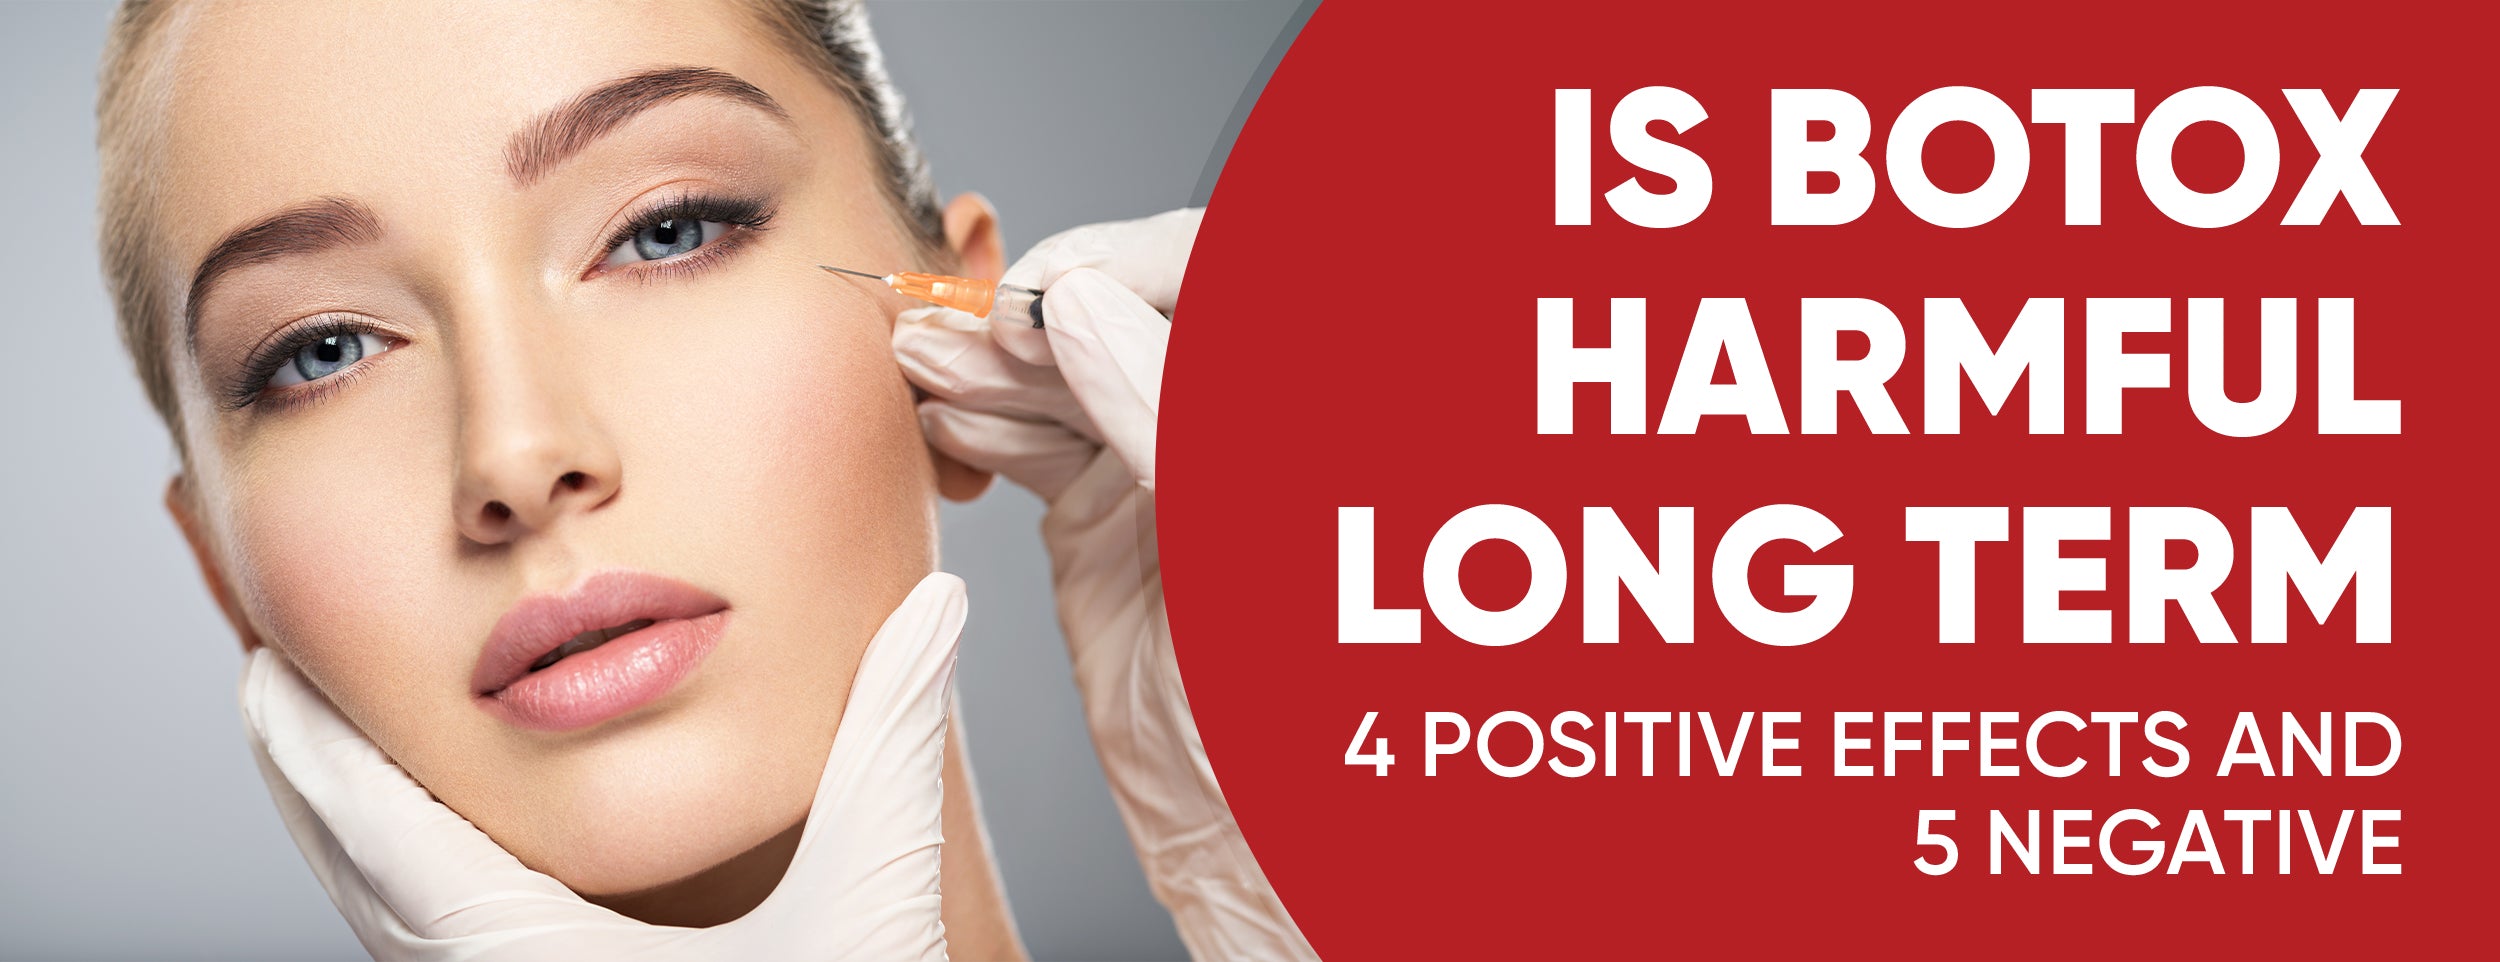 4 Positive Effects & 5 Negative Effects of Botox Long Term